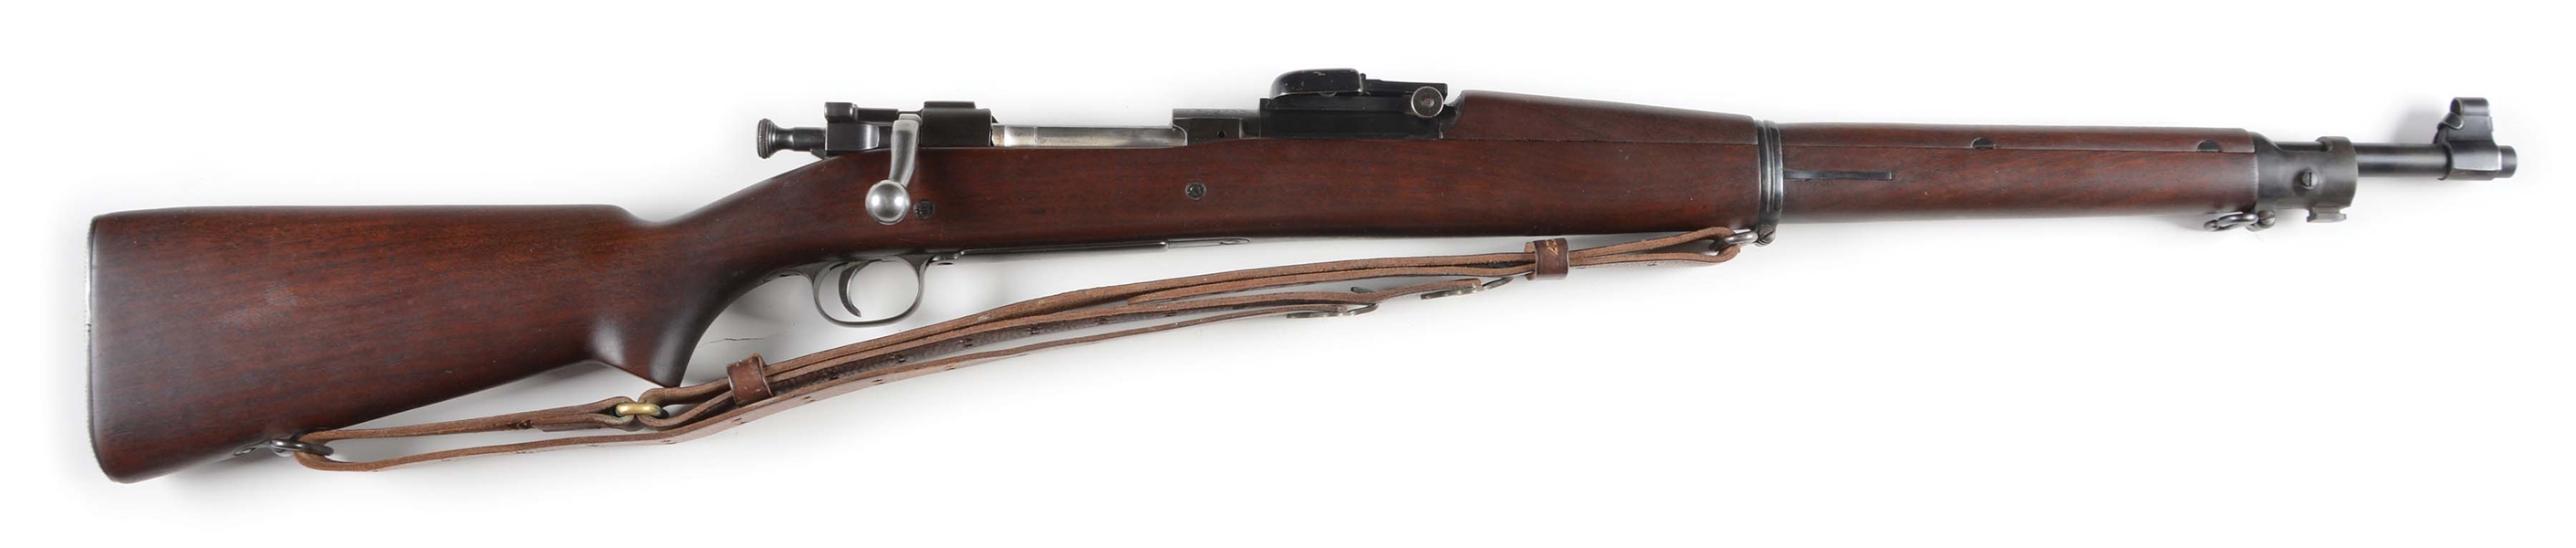 (C) SPECTACULAR, EARLY SPRINGFIELD ARMORY M1903 NATIONAL MATCH RIFLE (1929).